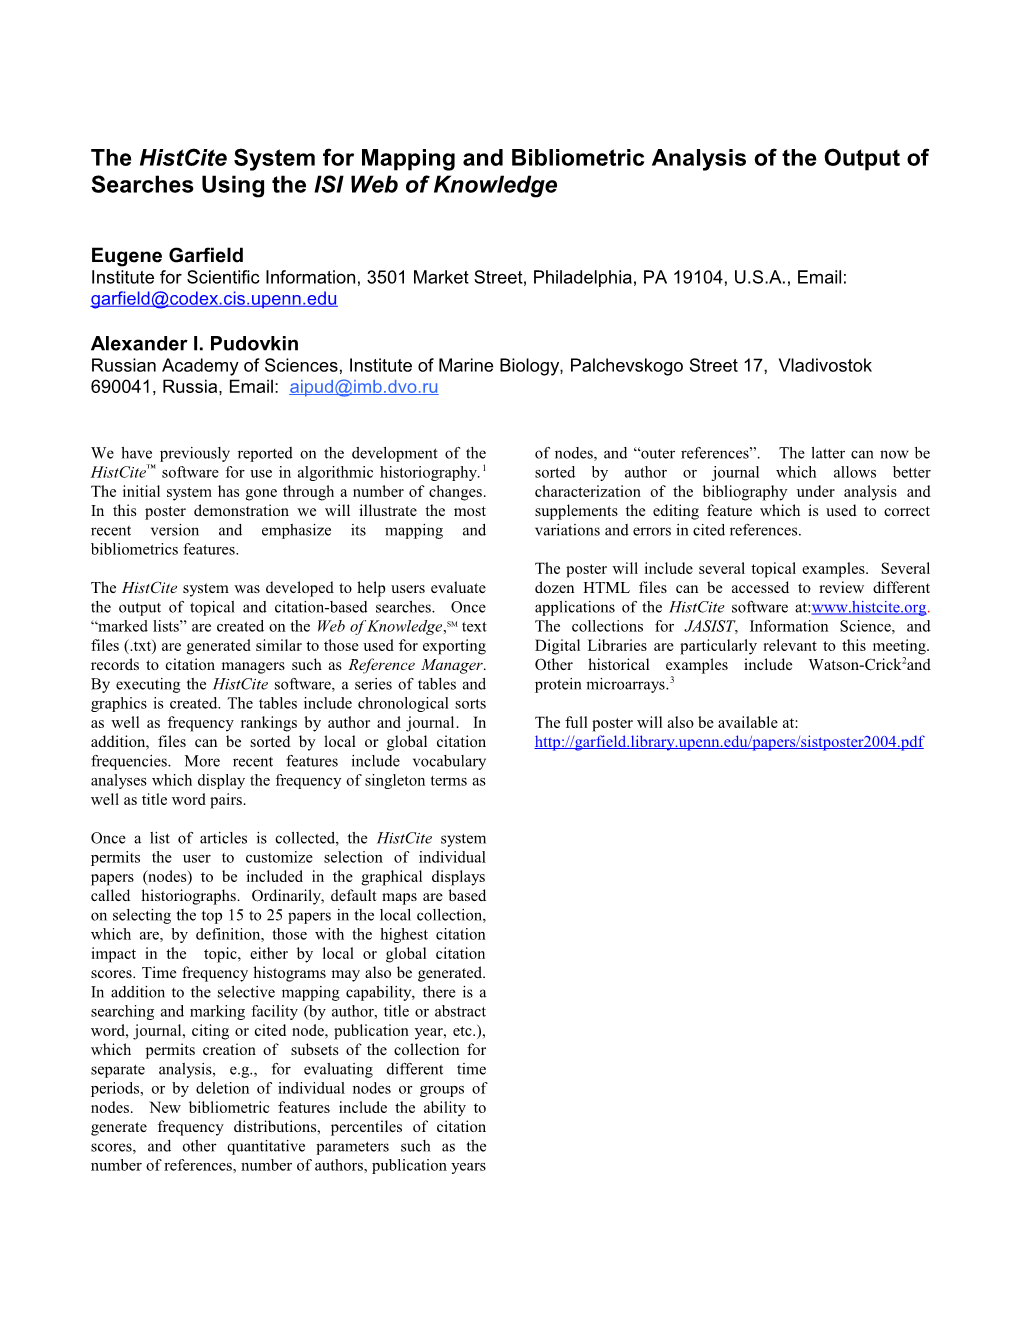 The Histcite System for Mapping and Bibliometric Analysis of the Output of Searches Using